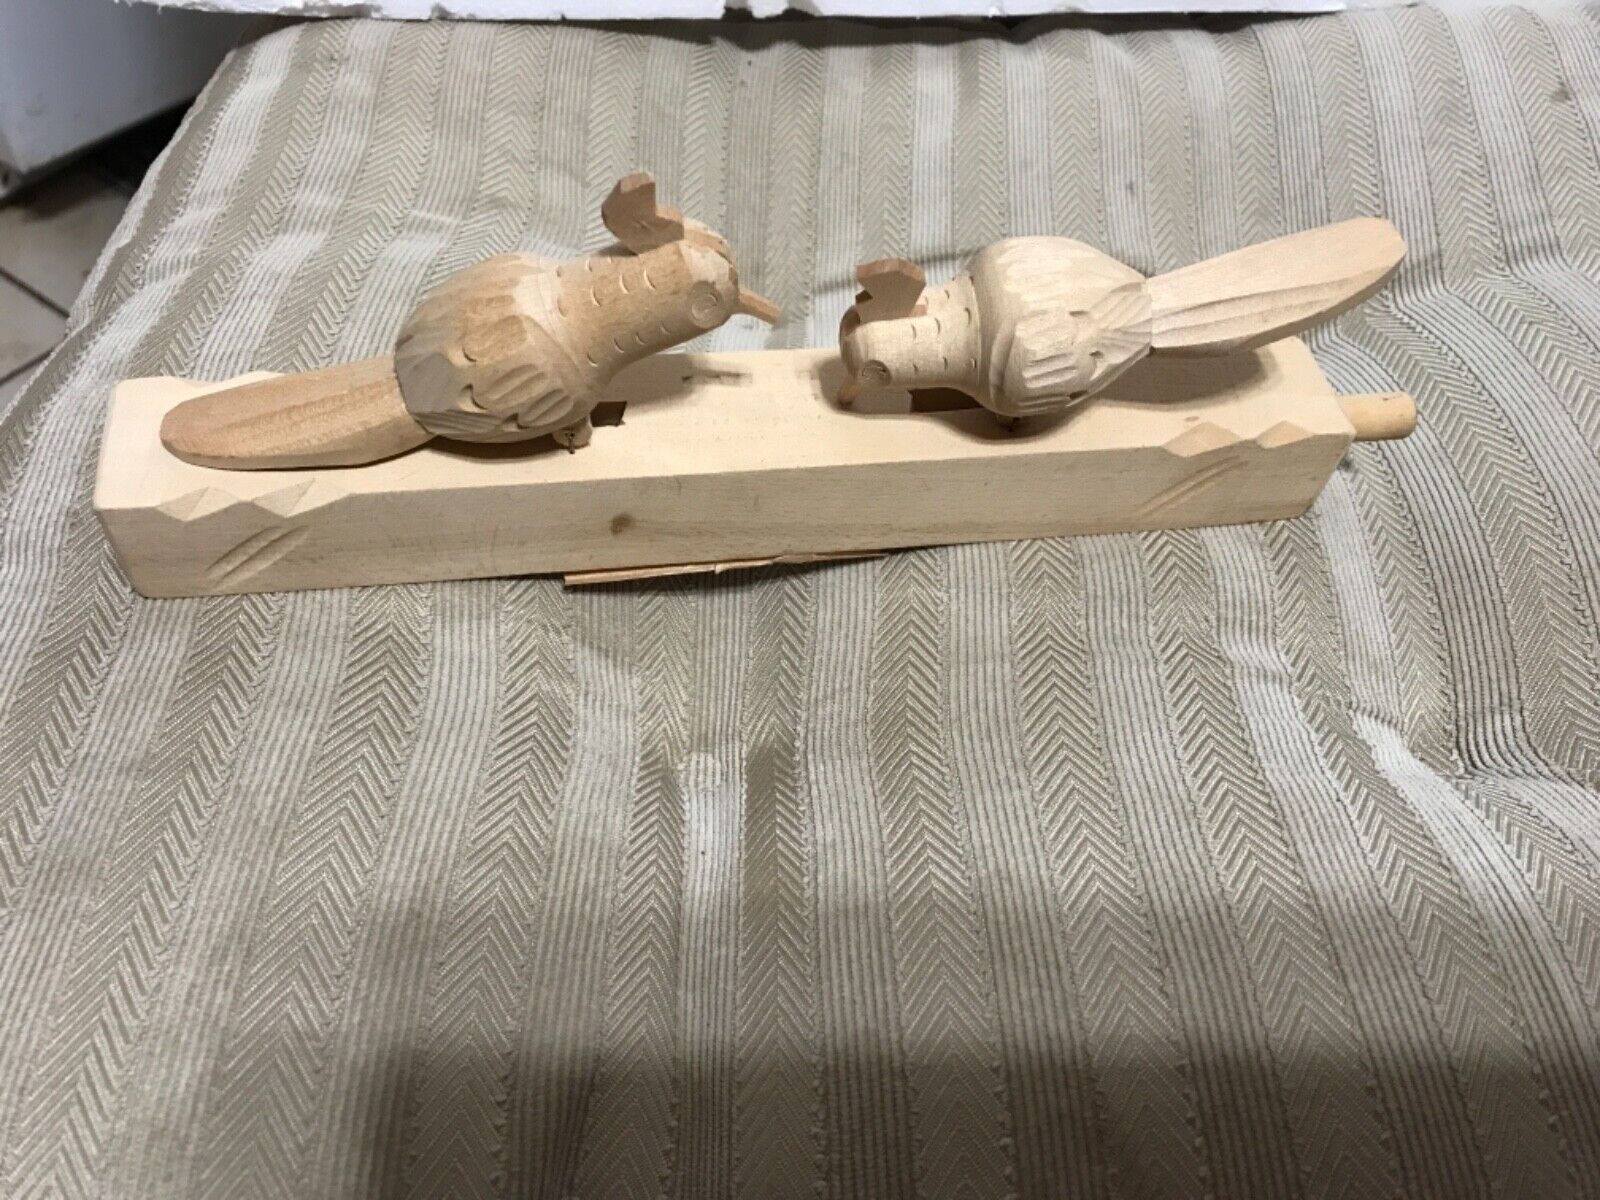 Russian hand carved animated wooden toy, woodpeckers pecking